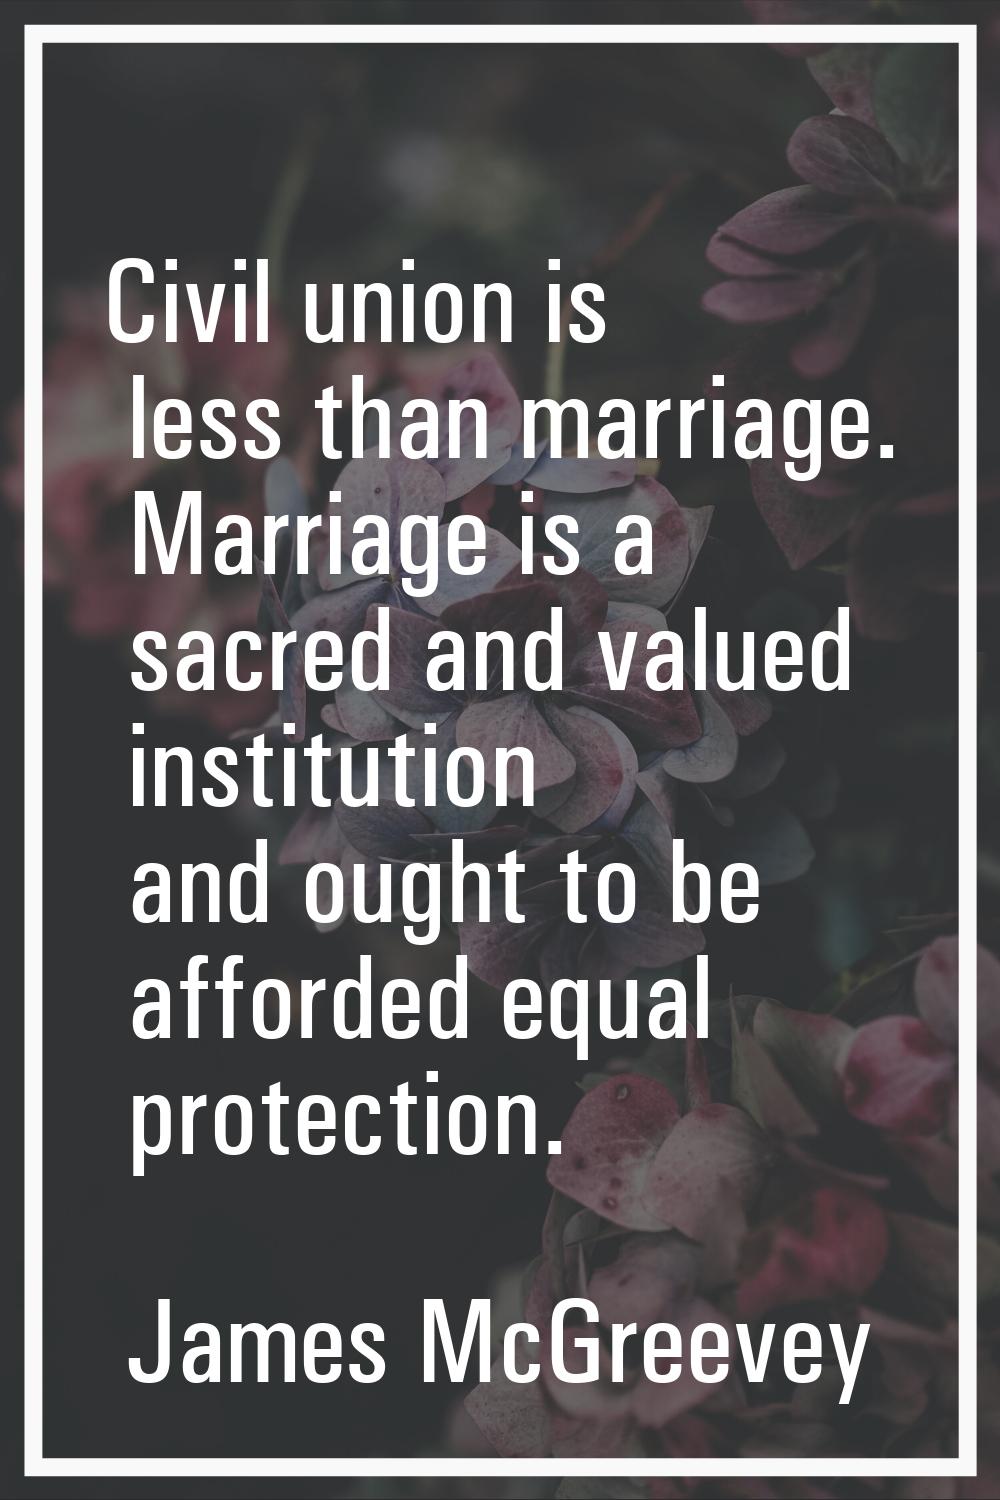 Civil union is less than marriage. Marriage is a sacred and valued institution and ought to be affo